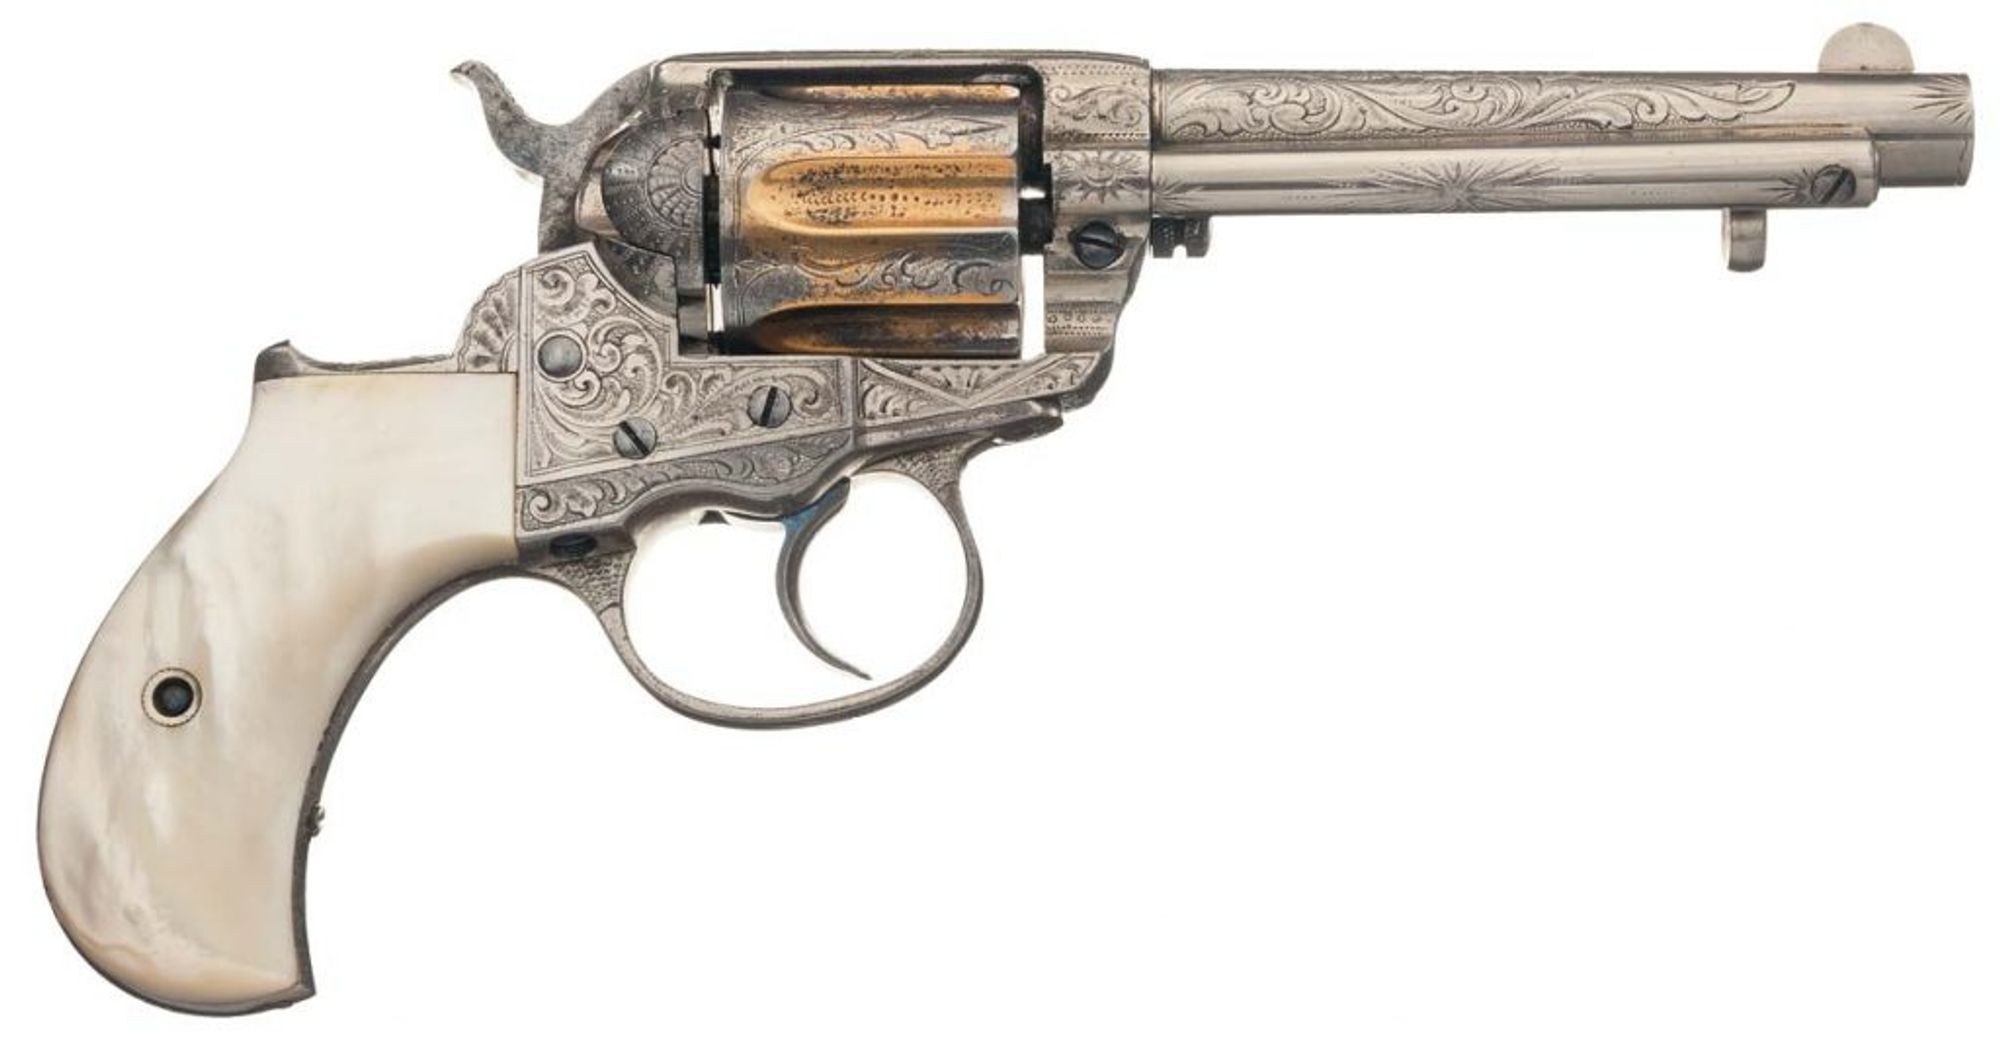 Gold and nickel-plated, factory engraved Colt Revolver